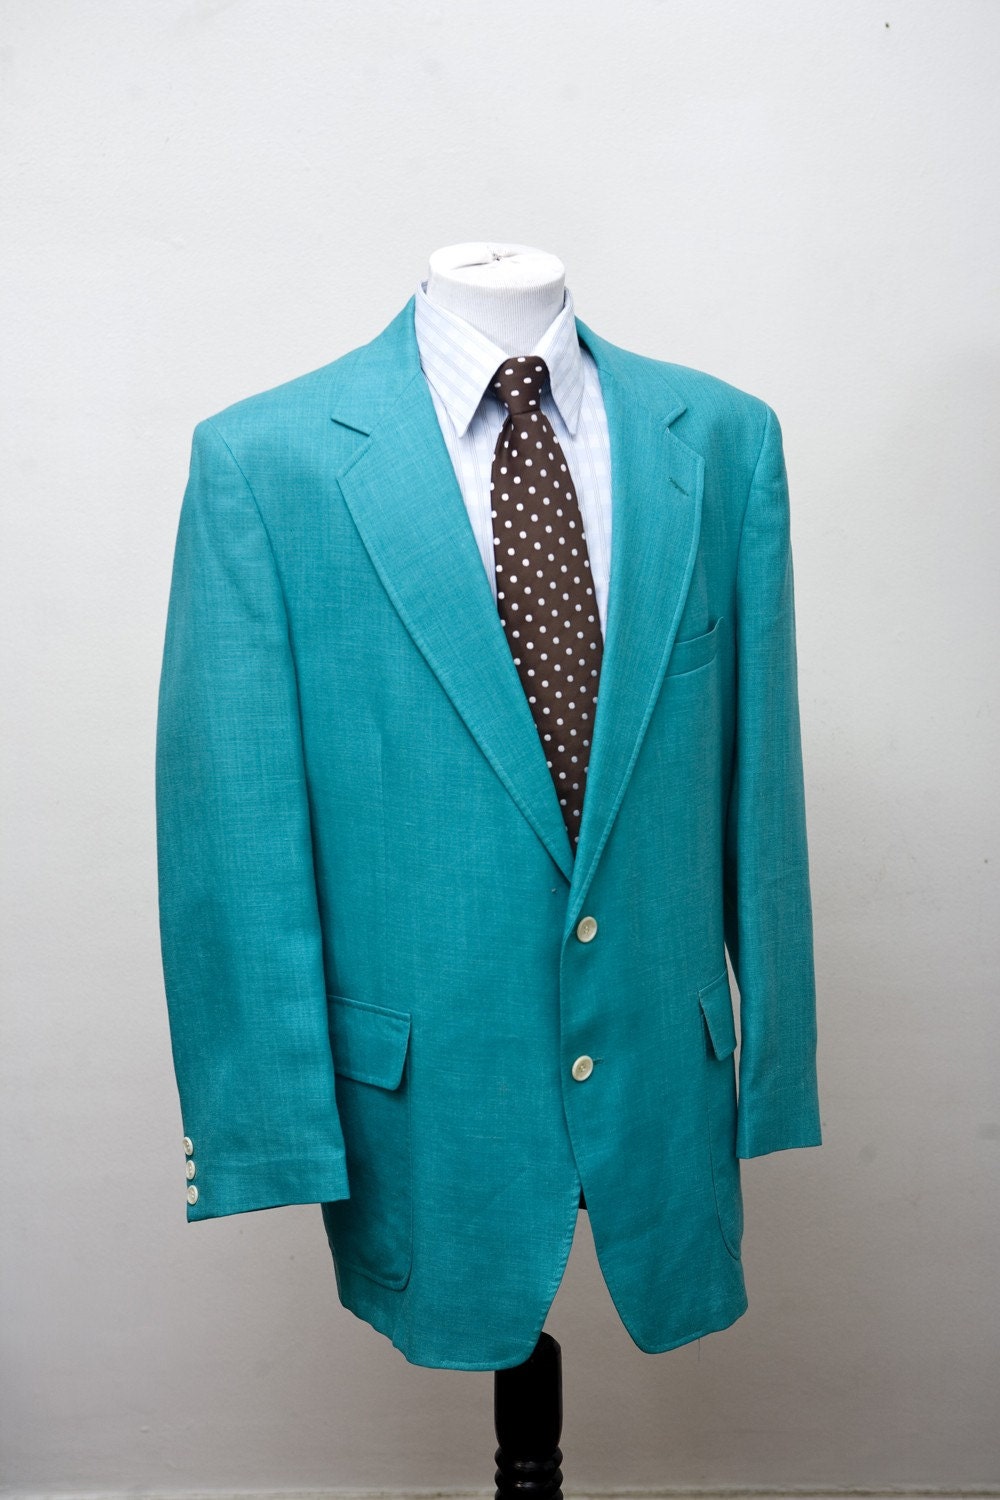 Size 44L Vintage Teal Sport Coat by BrightWall on Etsy